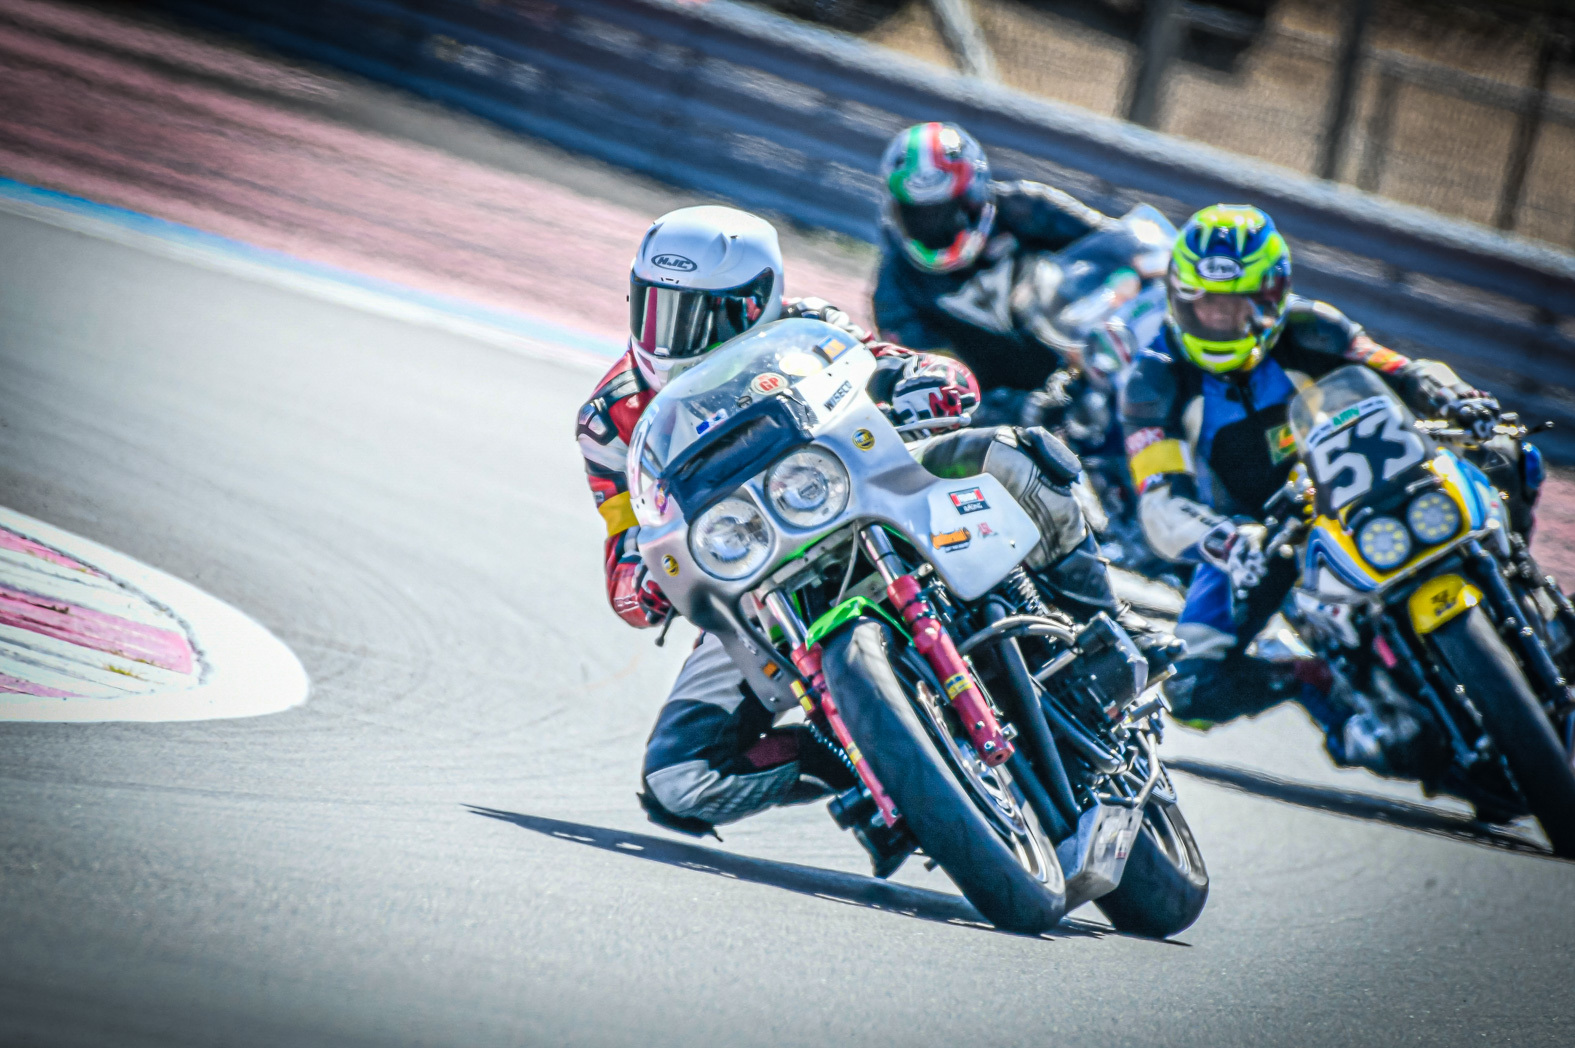 EELC.EU - A classic motorcycle endurance race series in Europe